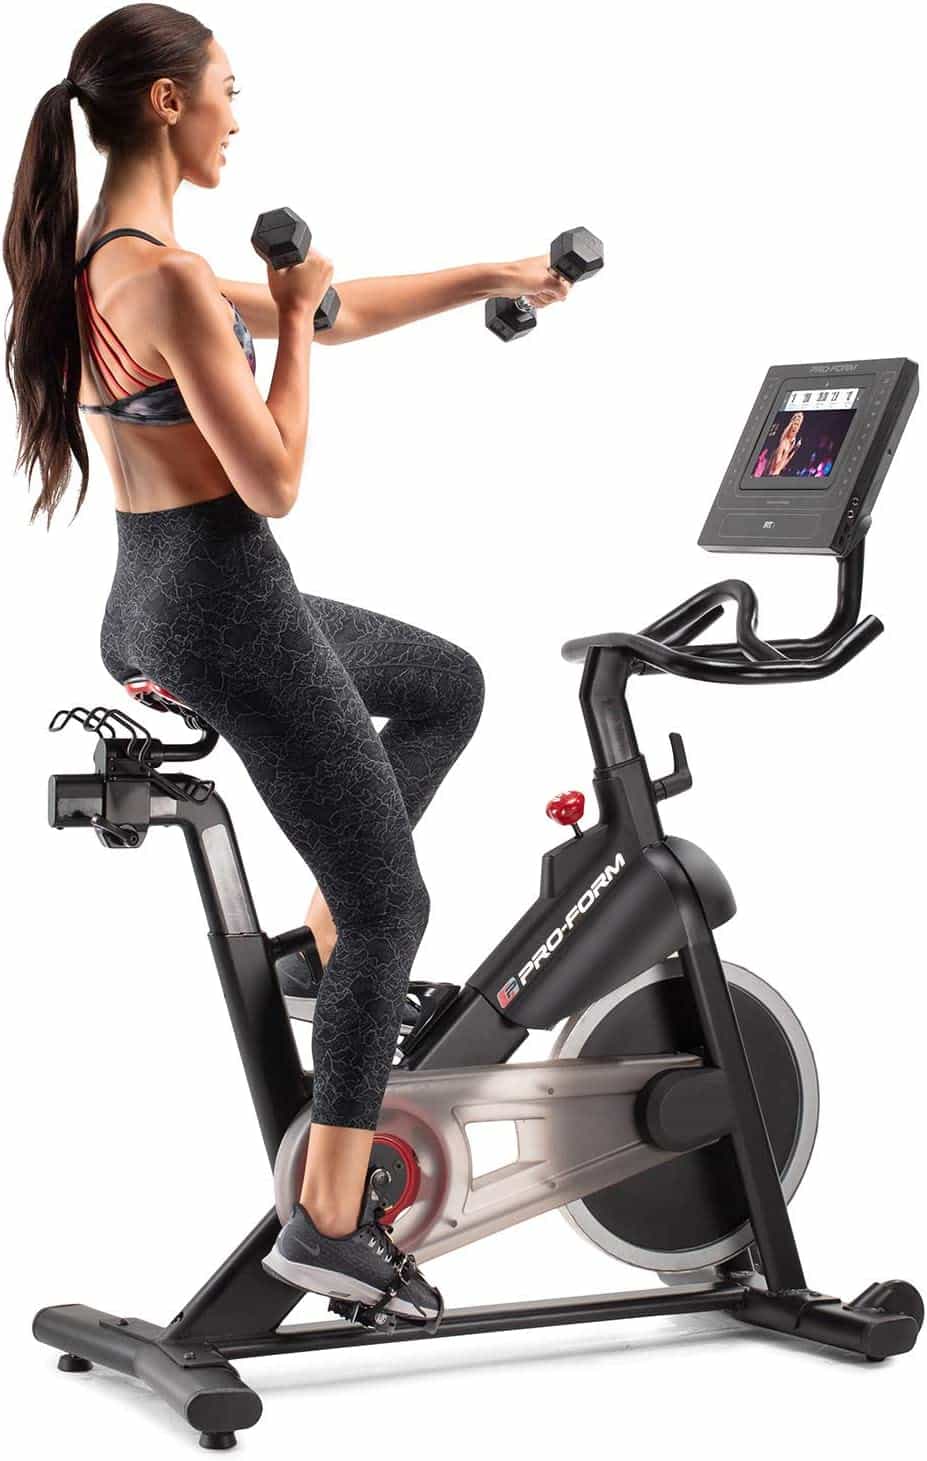 Proform Smart Power 10.0 Exercise Bike - with a female model cycling 